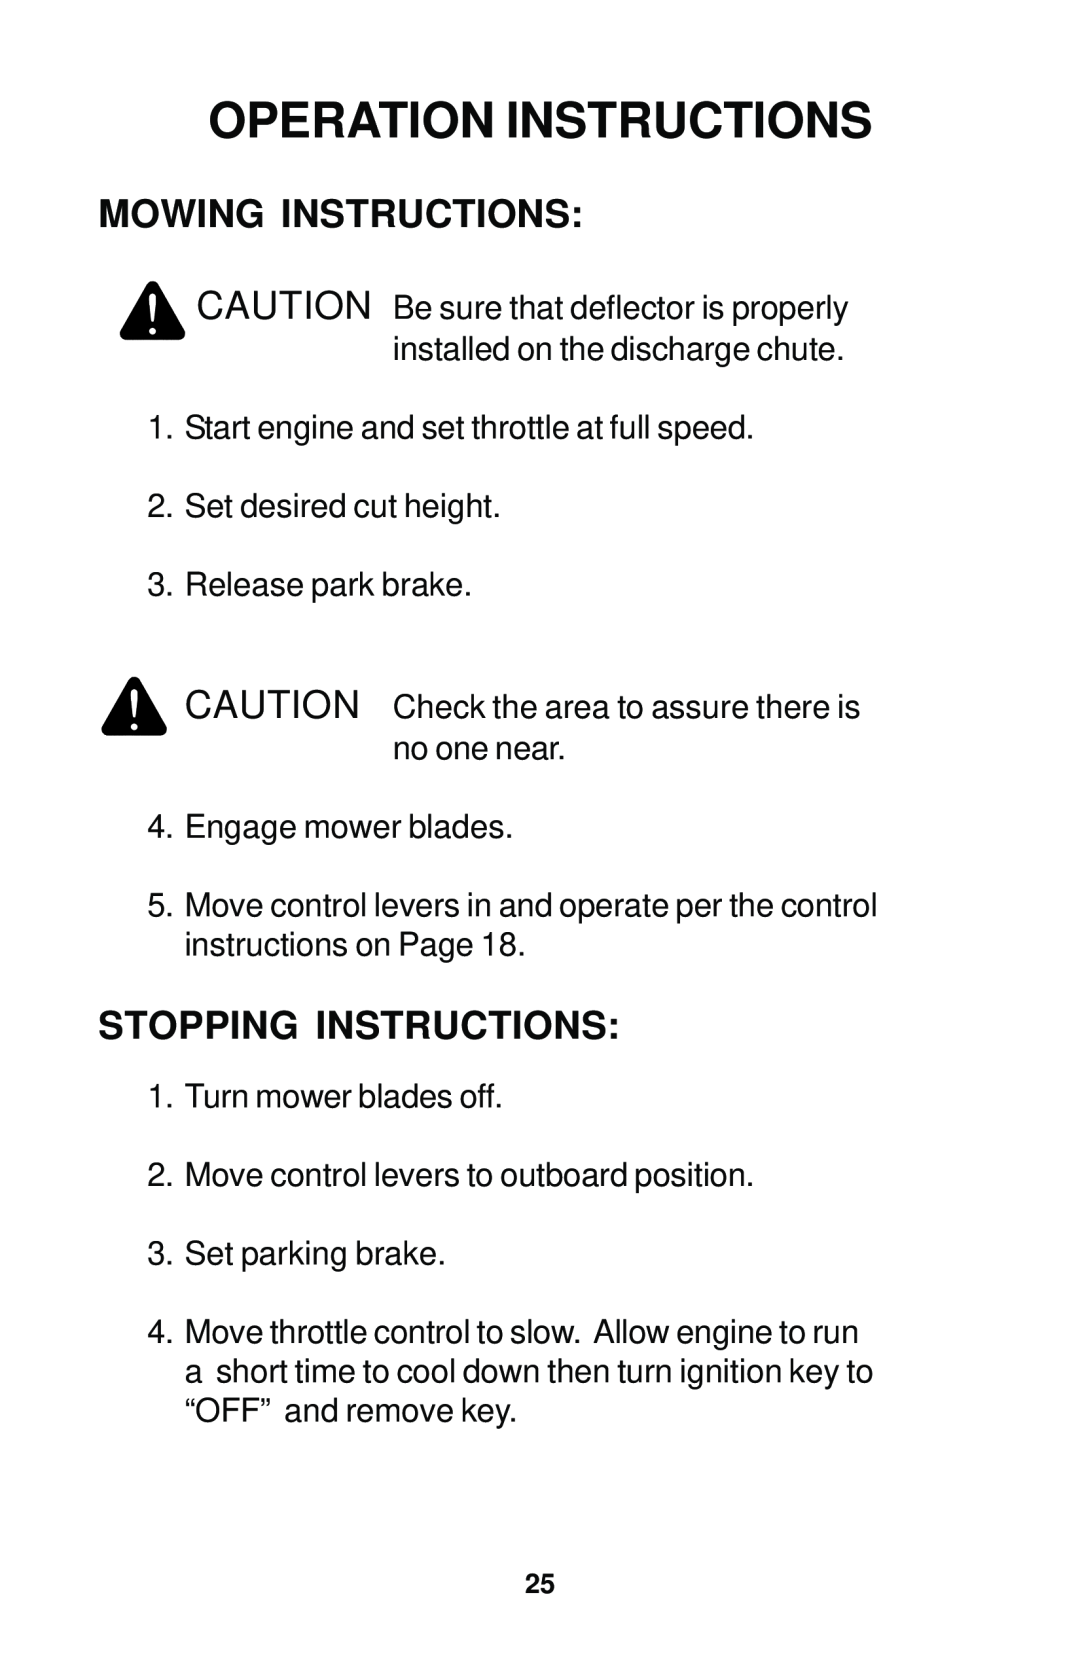 Dixon 12881-1104 manual Mowing Instructions, Stopping Instructions, Operation Instructions 